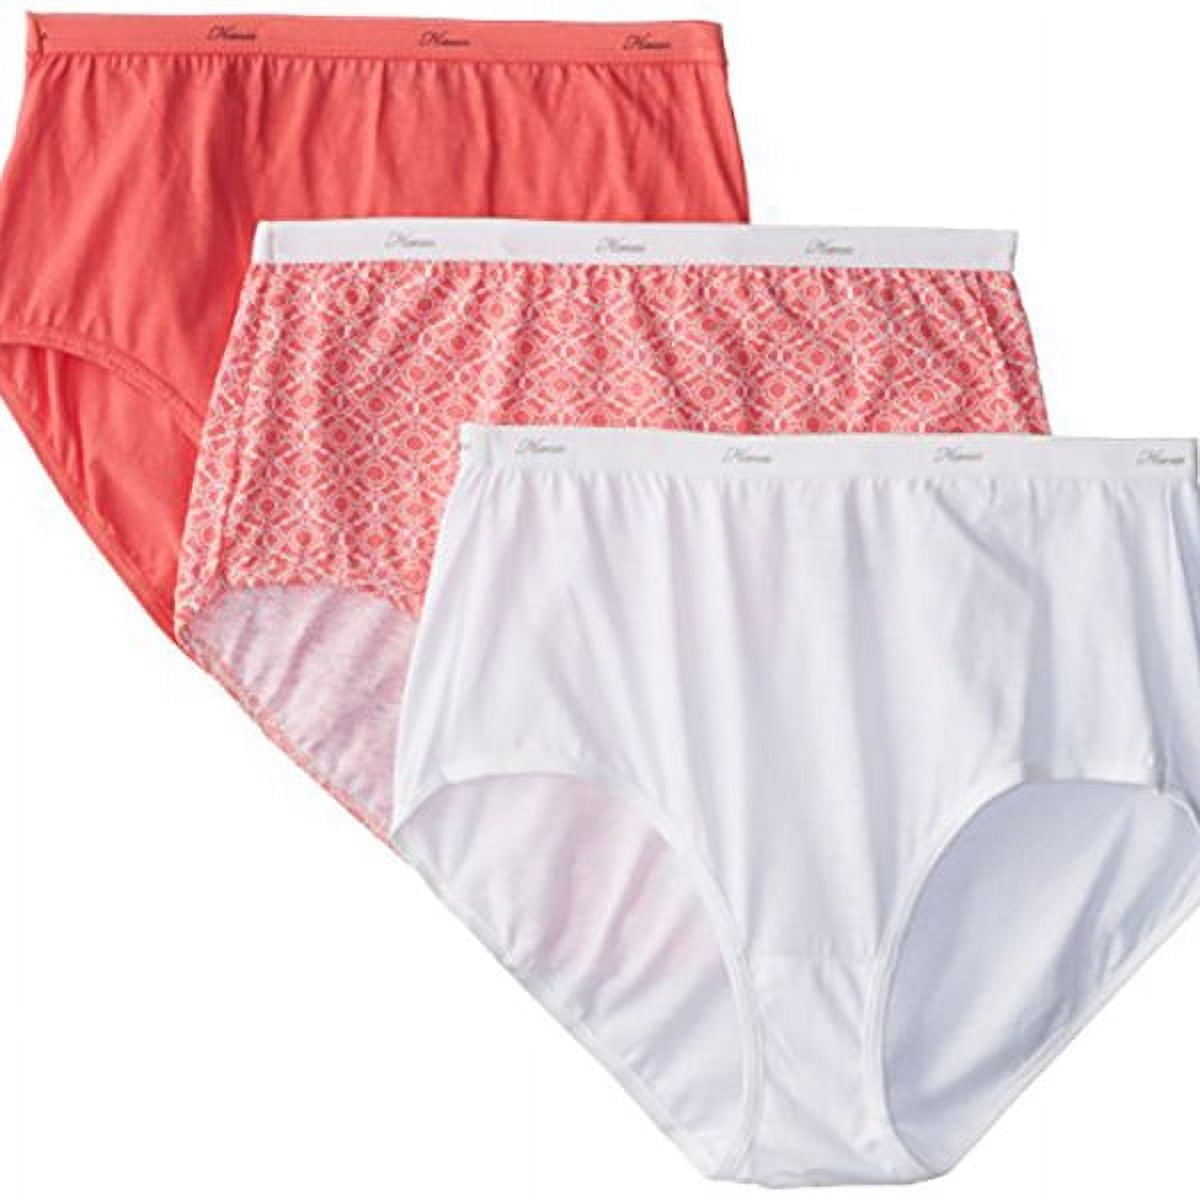 Women's Assorted Cotton Briefs (3 Pack) by Hanes